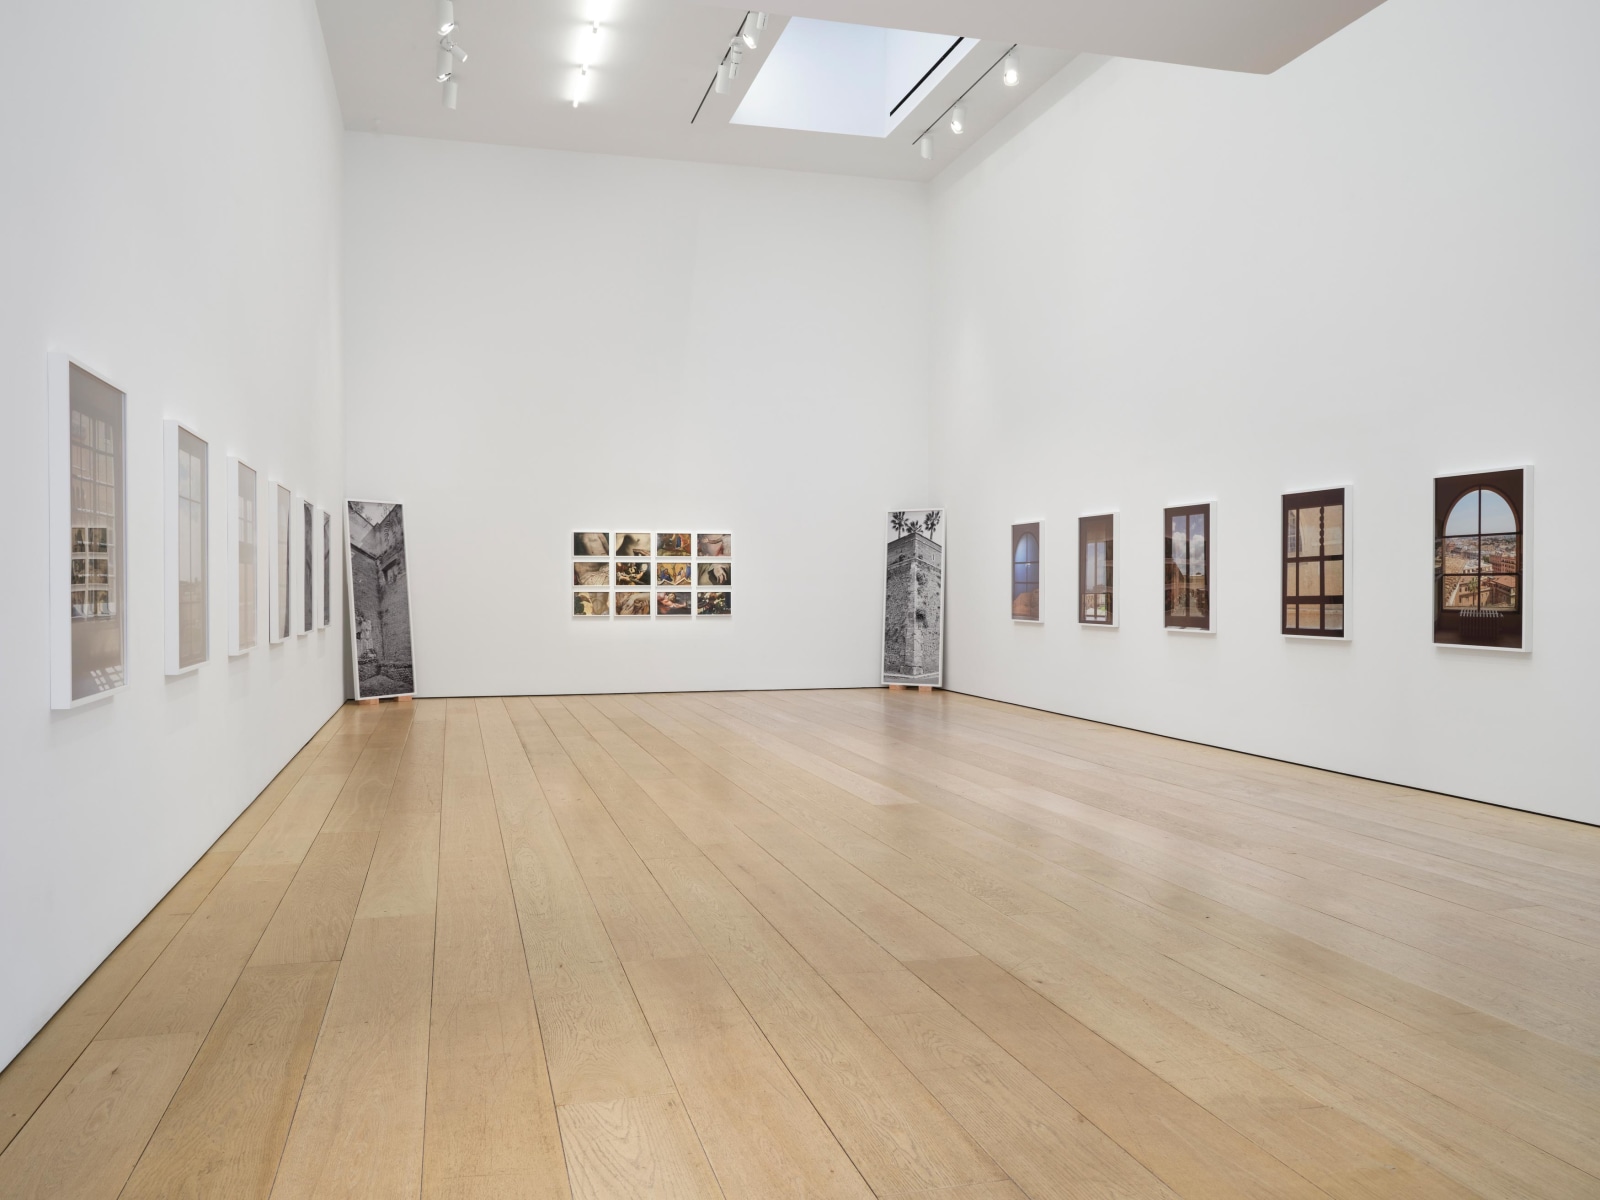 Catherine Opie: Walls, Windows and Blood, Installation view